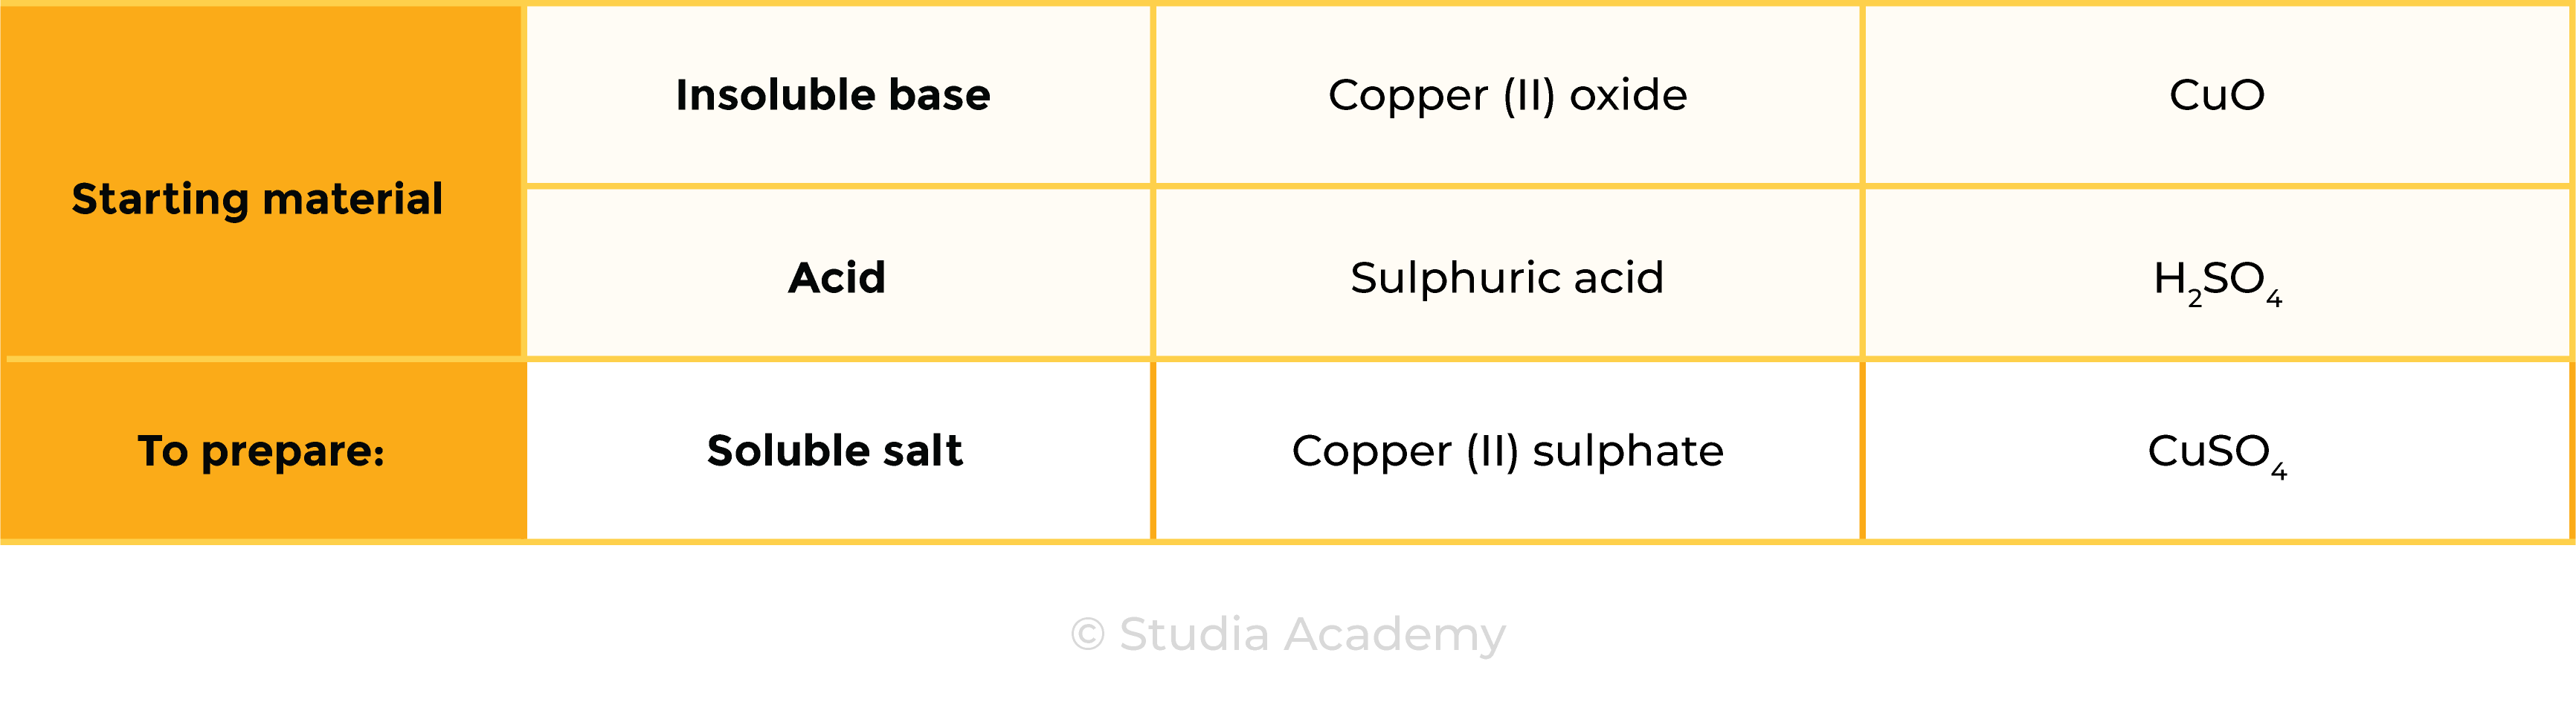 edexcel_igcse_chemistry_topic 16 tables_acids, bases, and salt preparations_004_reactants to prepare copper sulfate crystals